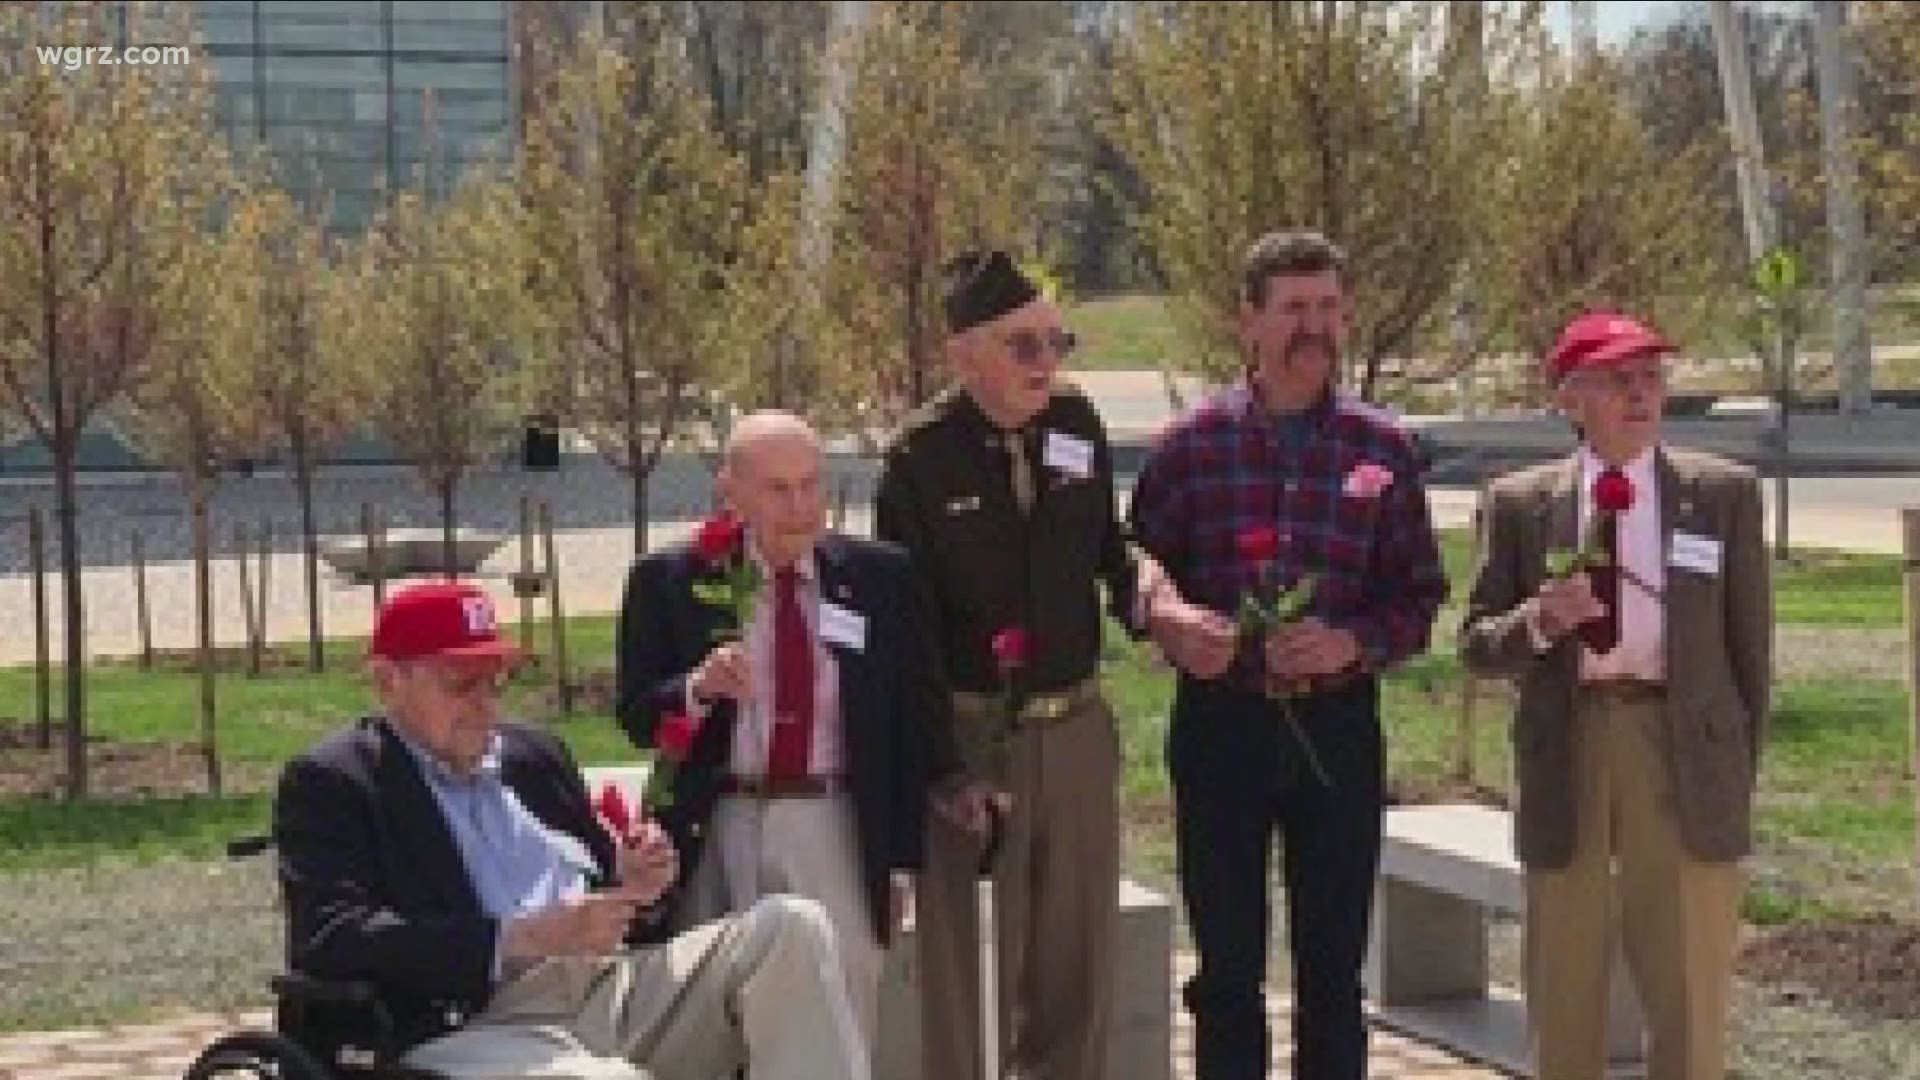 Help make the birthday of a 100-year-old veteran from Western New York a birthday he'll never forget.